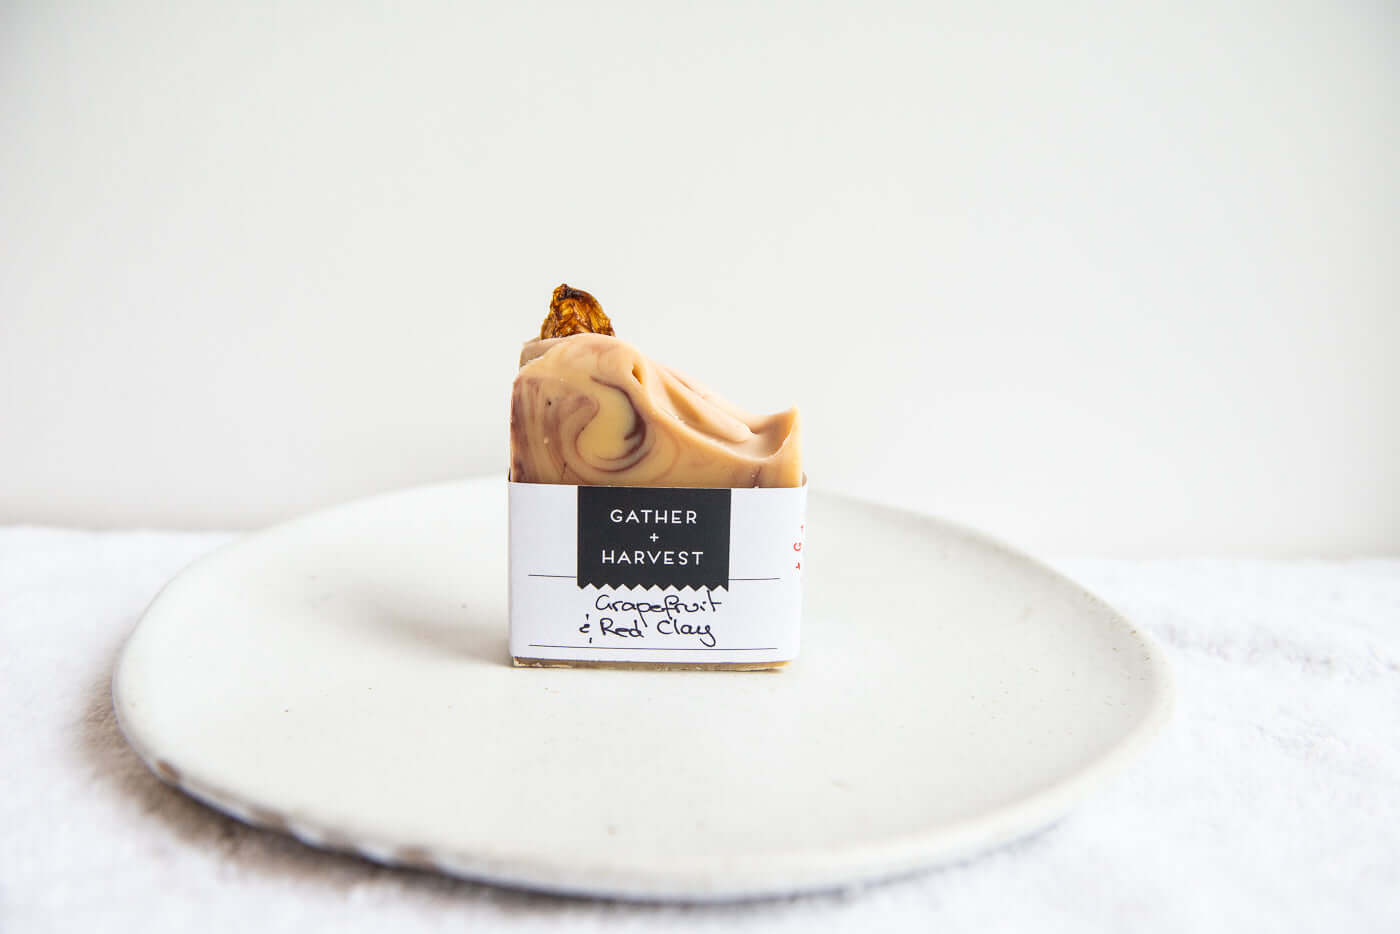 This handmade natural soap with Grapefruit & Australian Pink Clay Soap deeply nourishes your skin